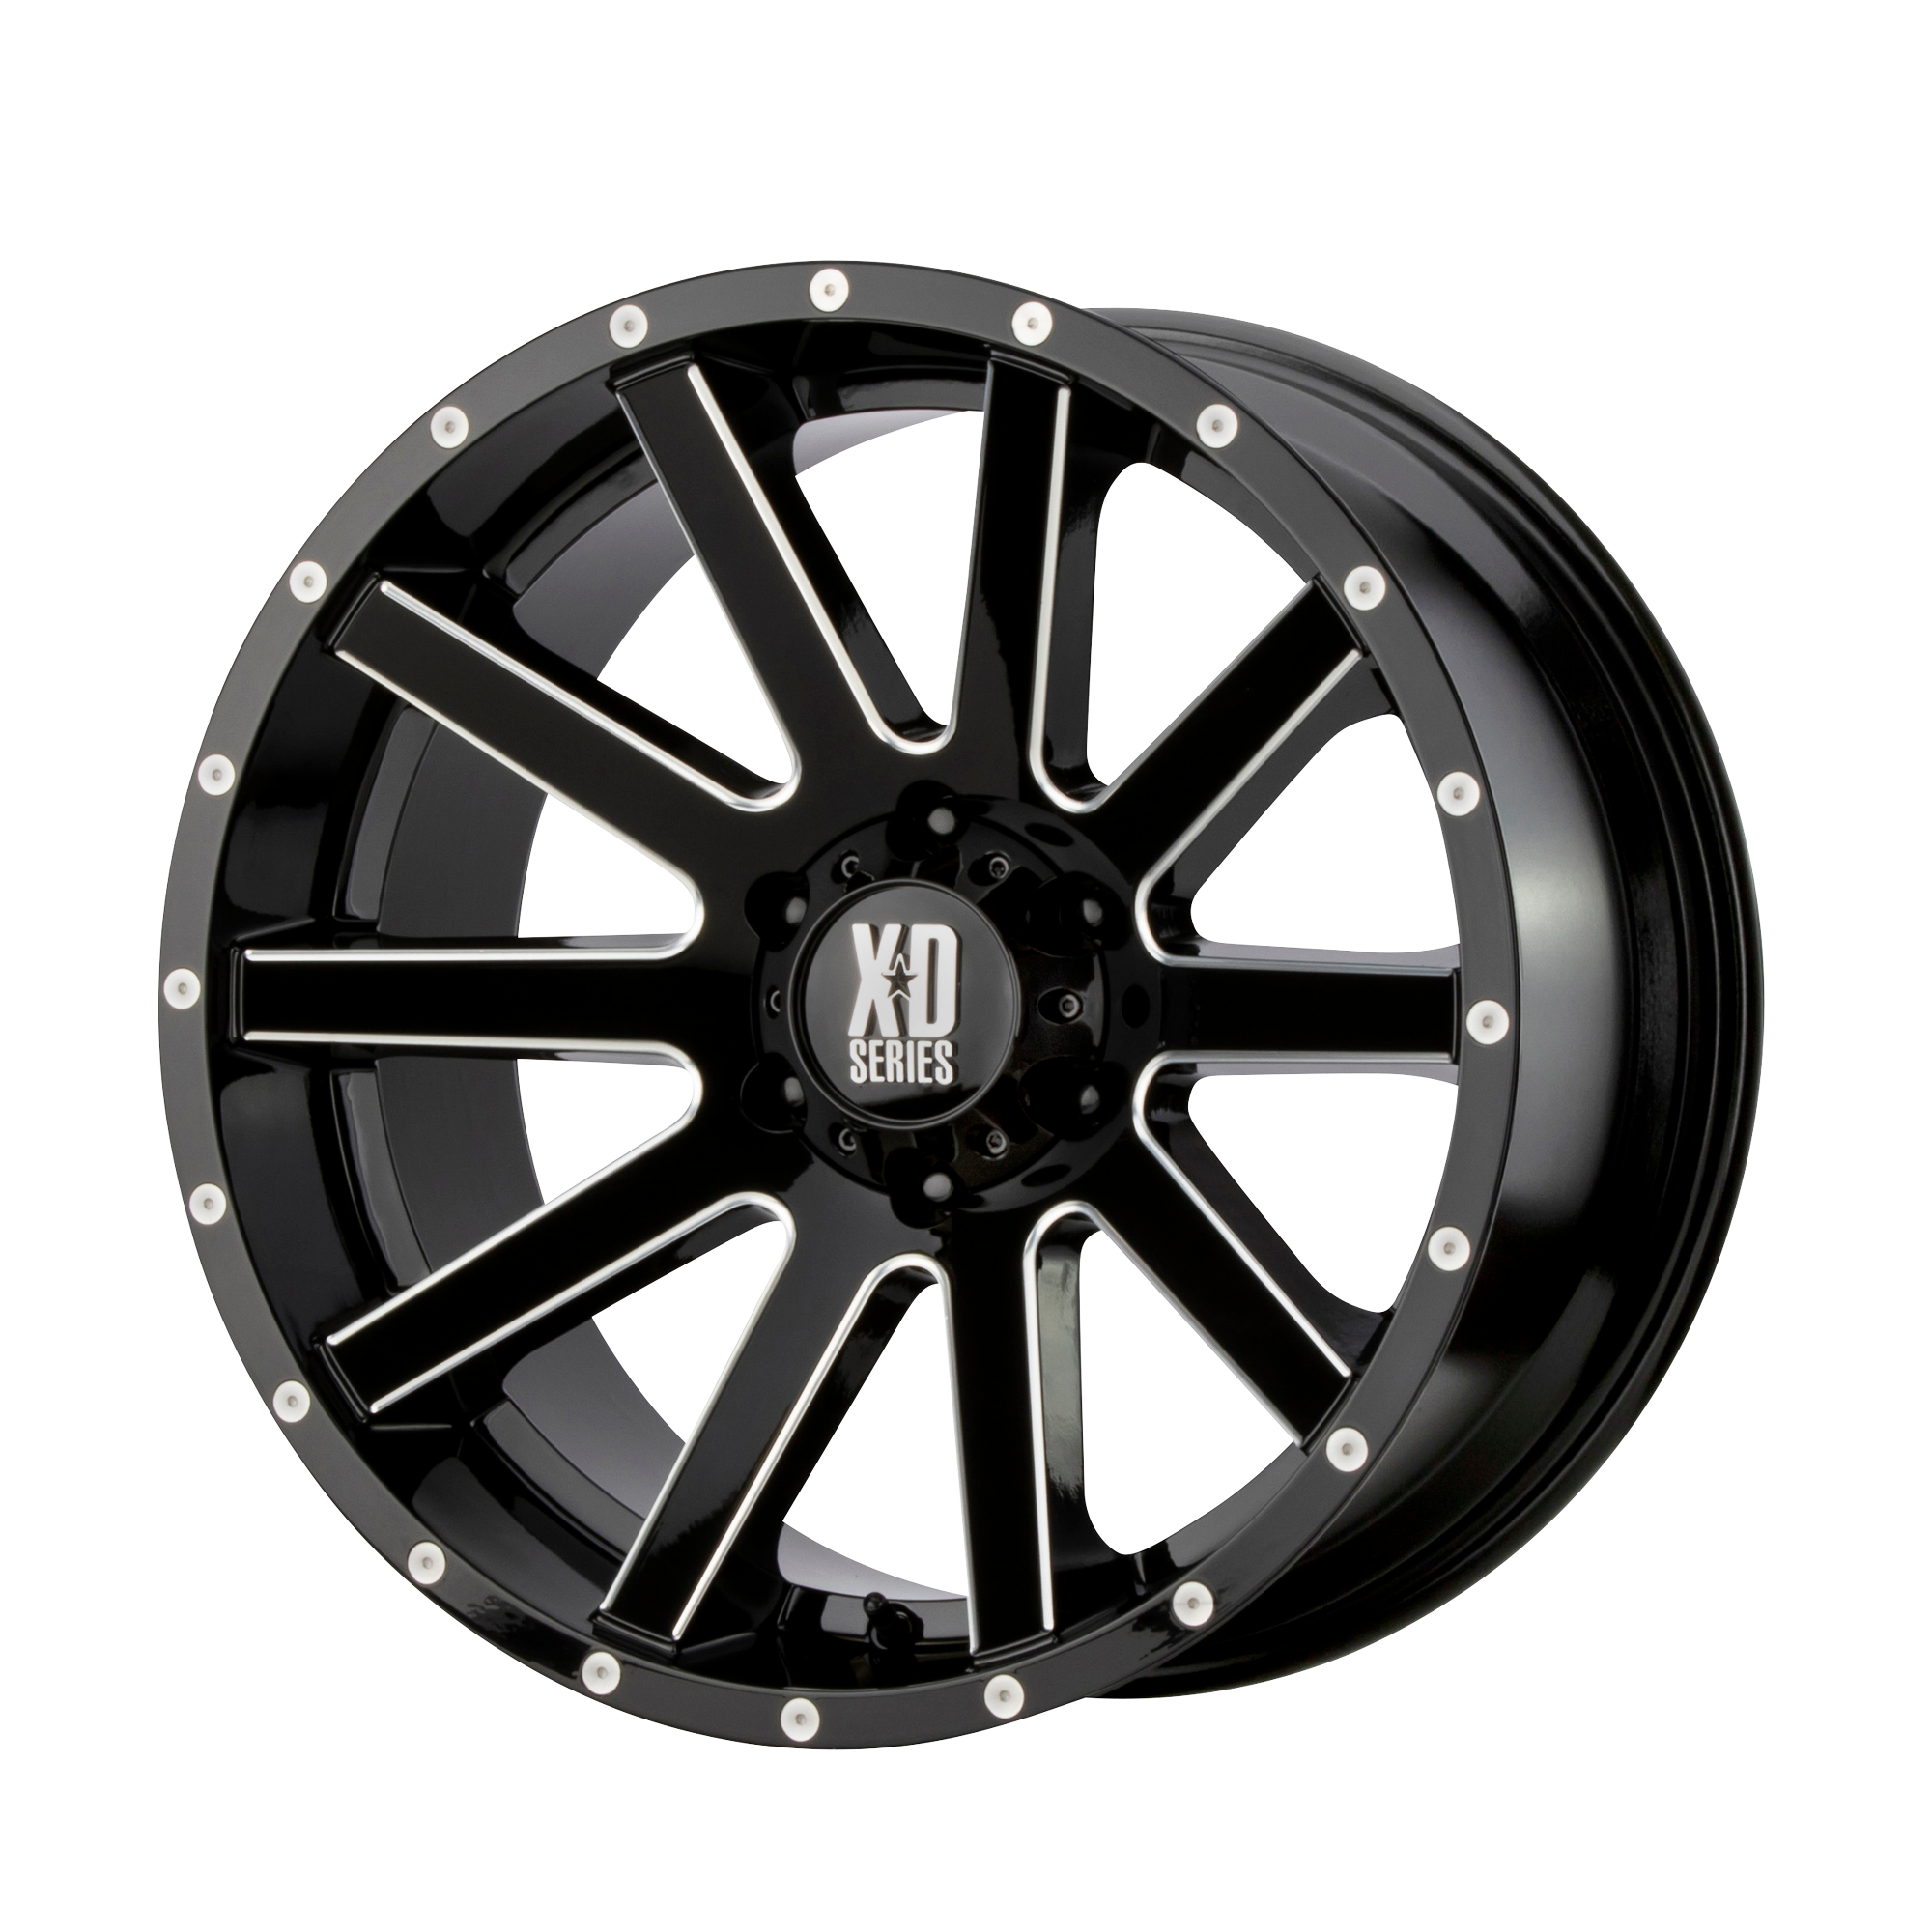 HEIST 20x9 5x150.00 GLOSS BLACK MILLED (30 mm) - Tires and Engine Performance